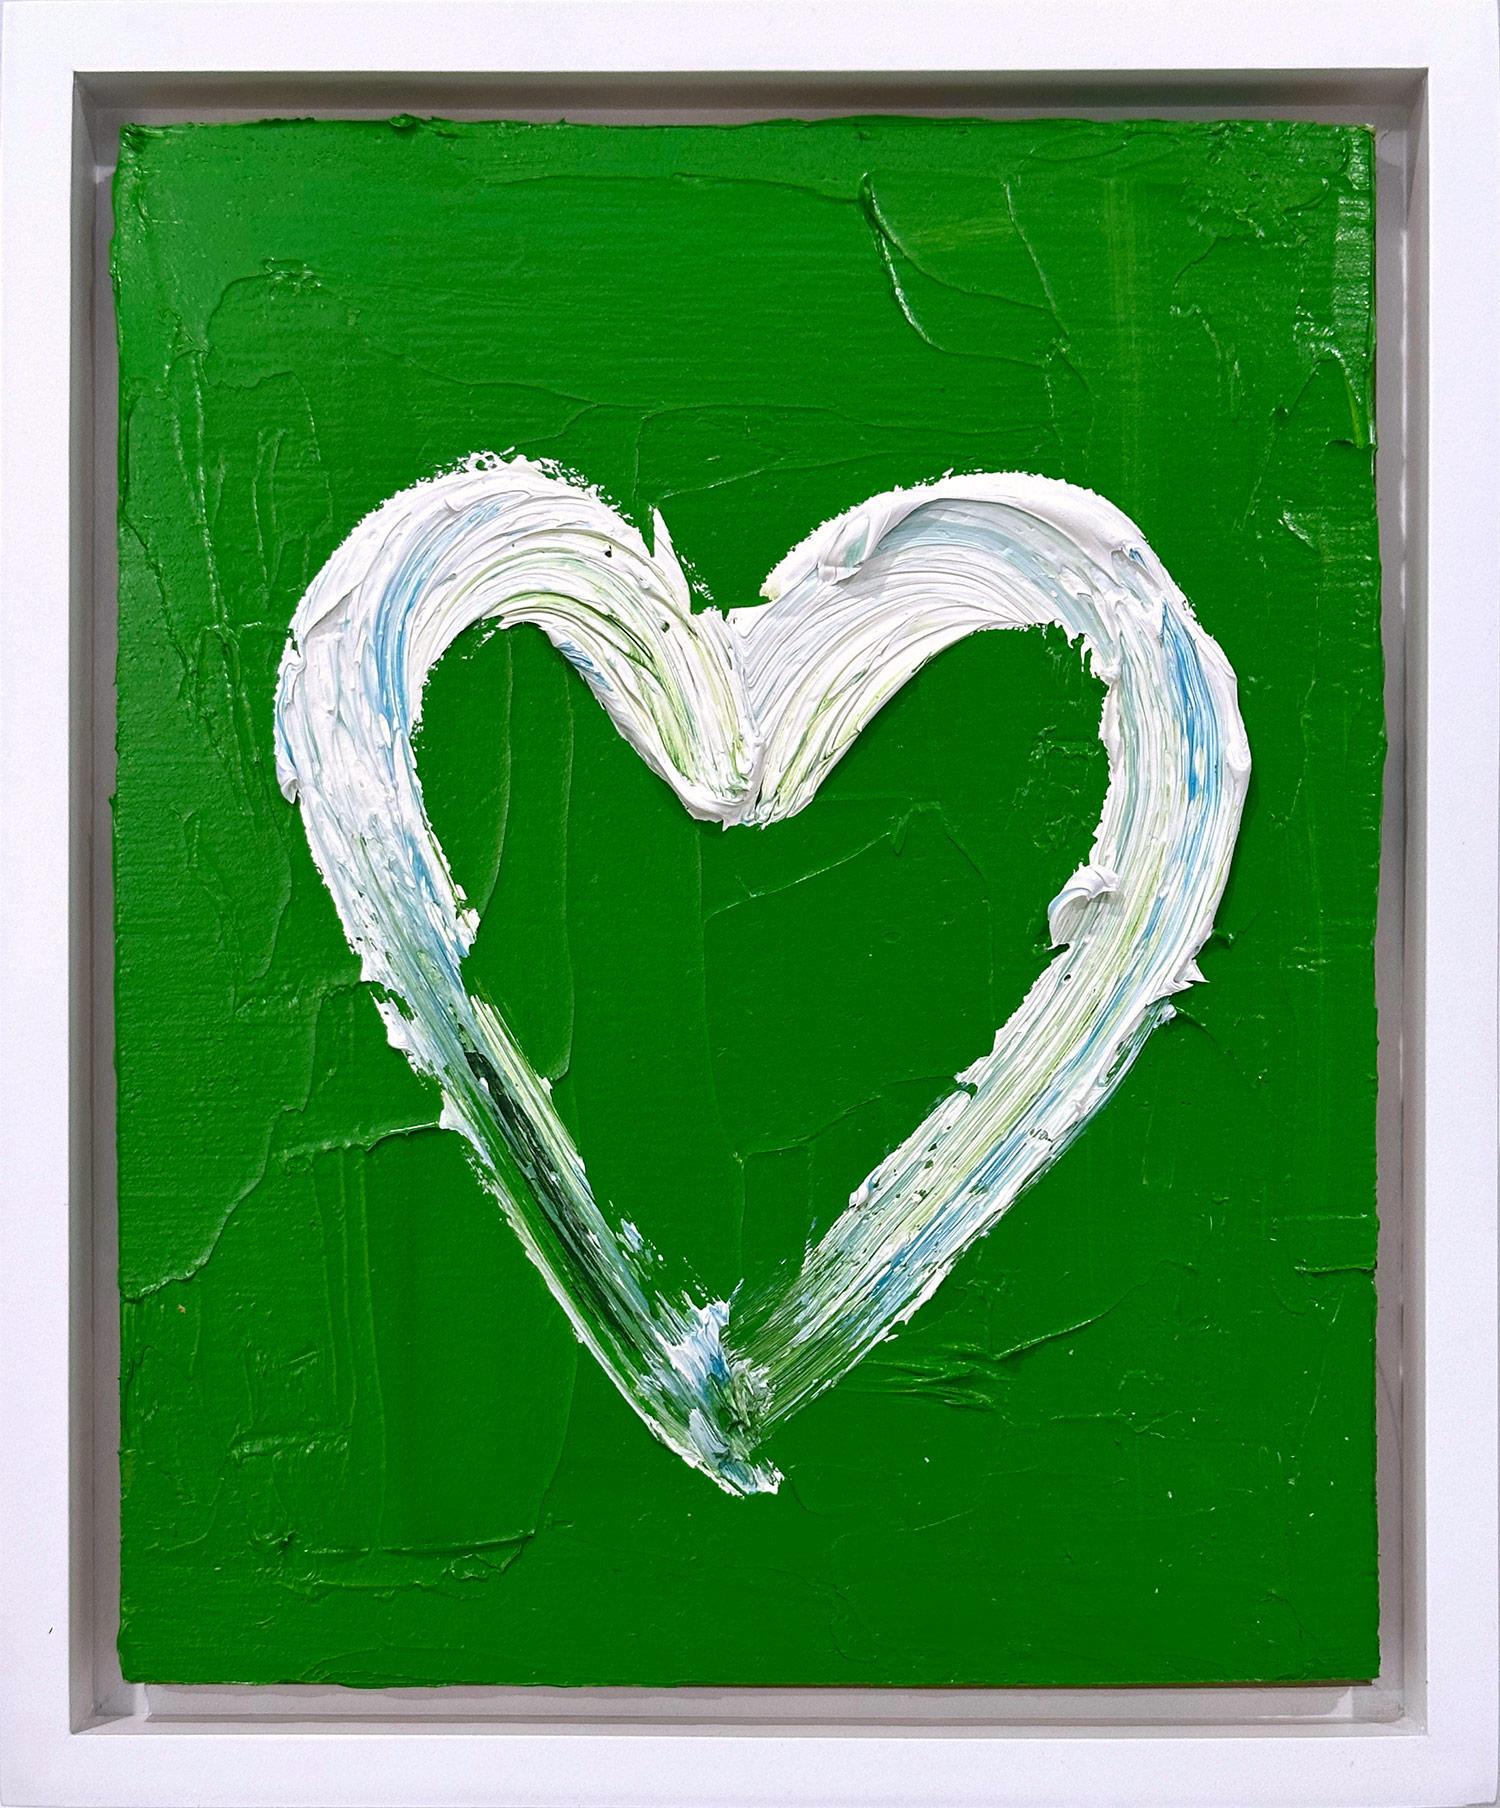 Cindy Shaoul Abstract Painting - "My Lucky Charm Heart" Contemporary Pop Art Green Oil Painting on Floater Frame